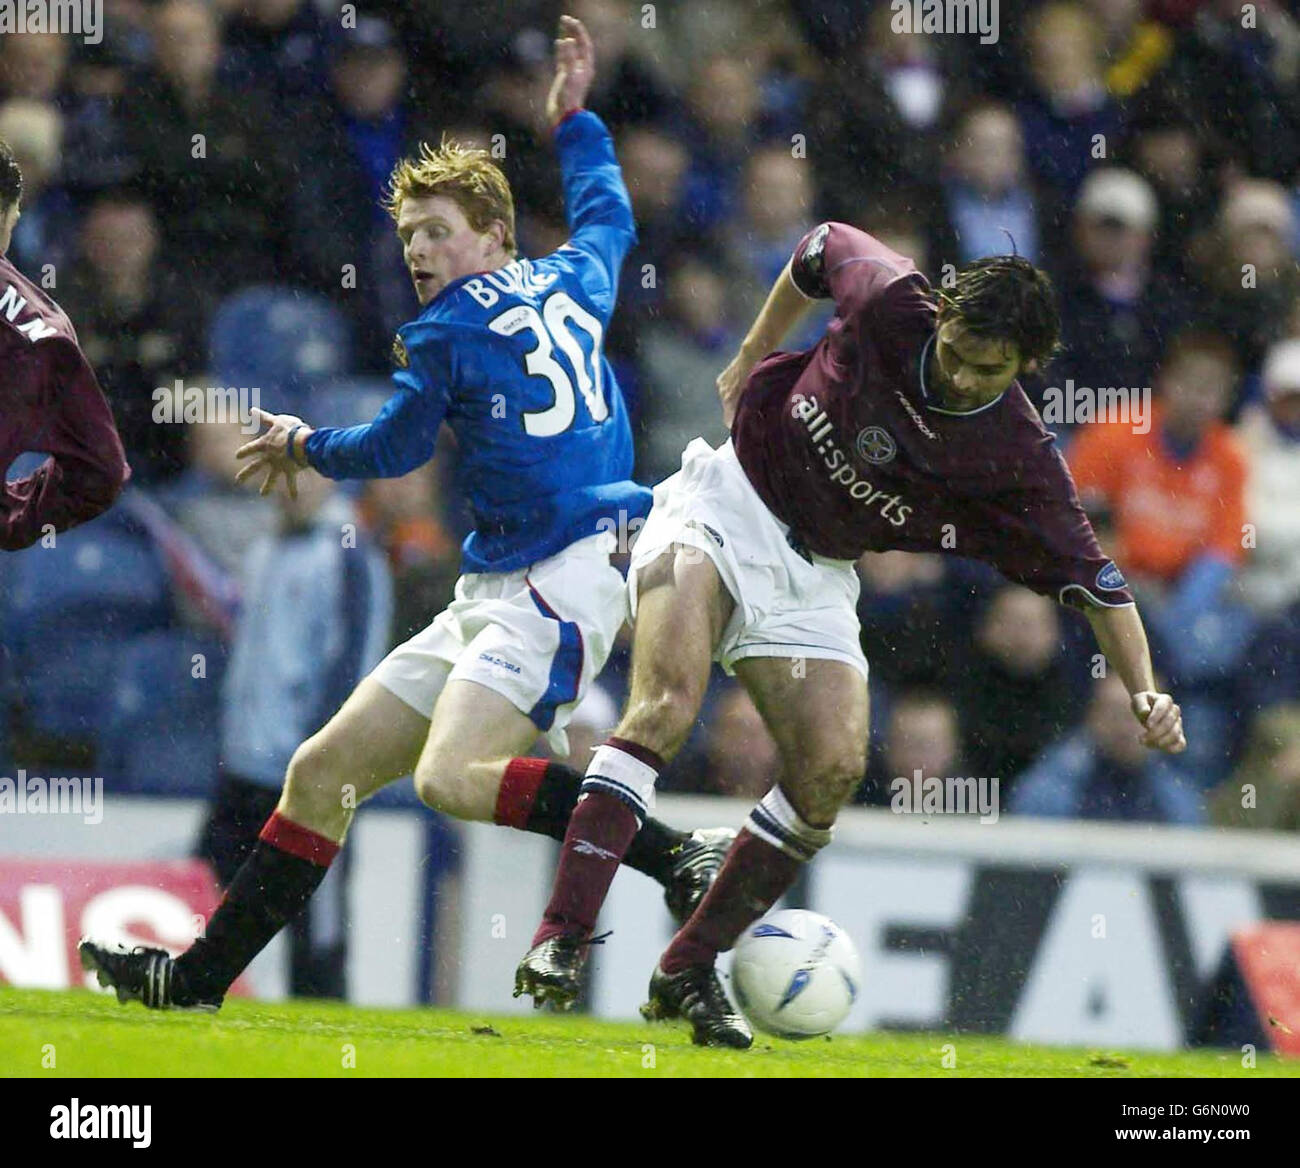 : Rangers player Chris Burke and Hearts player Paul Hartley, during their Bank of Scotland Scottish Premiership match at Rangers' Ibrox Stadium in Glasgow. Stock Photo